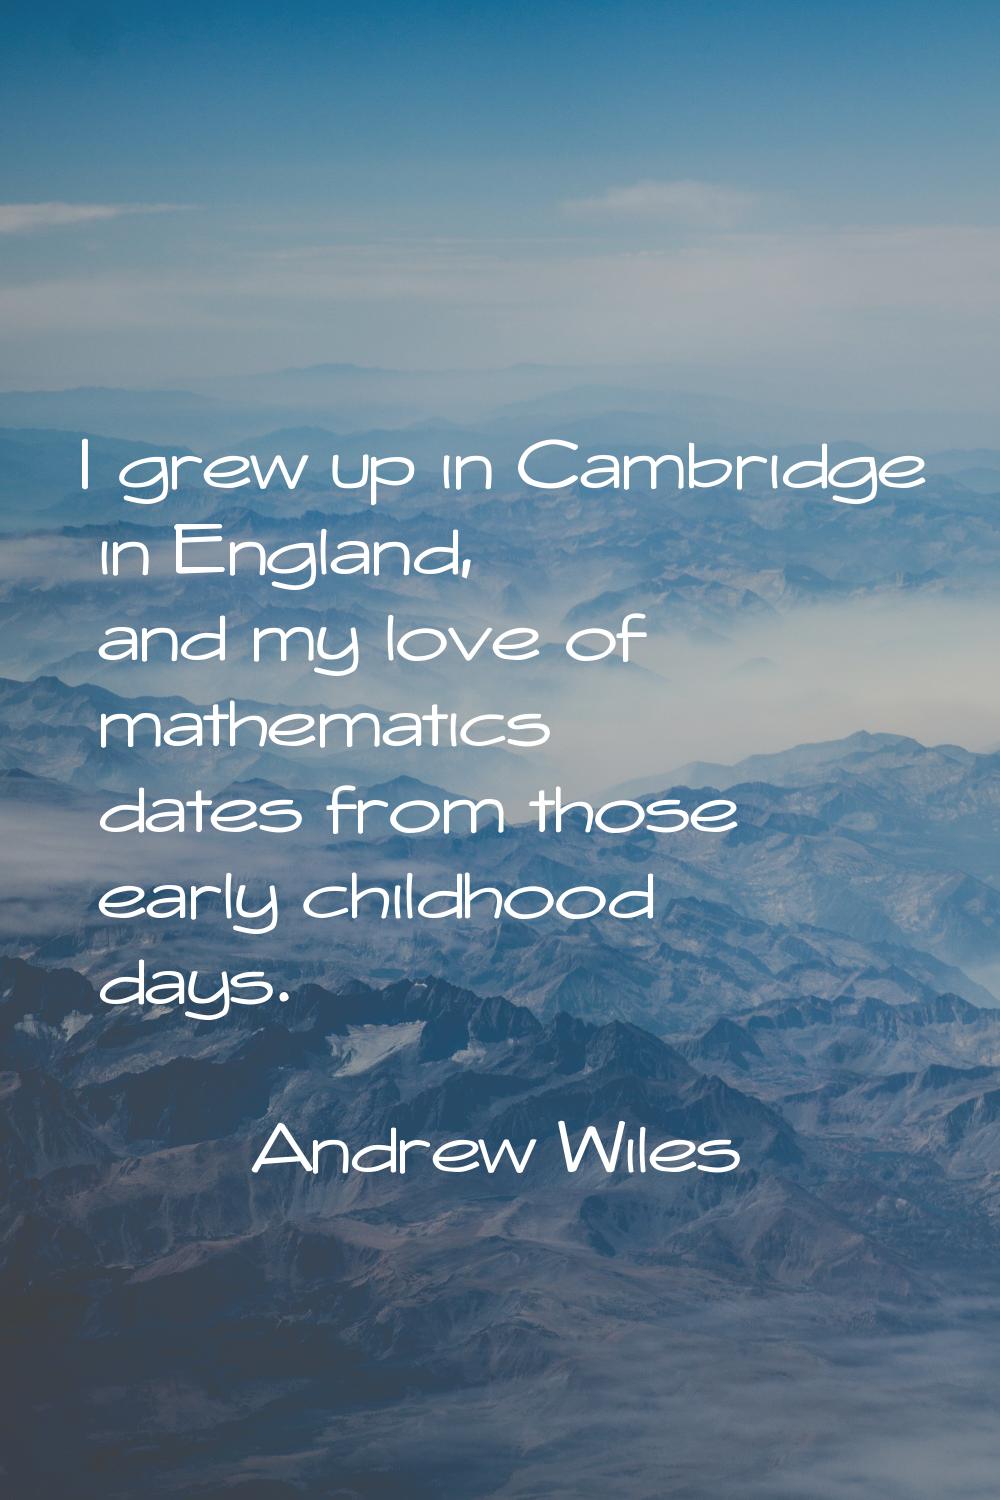 I grew up in Cambridge in England, and my love of mathematics dates from those early childhood days